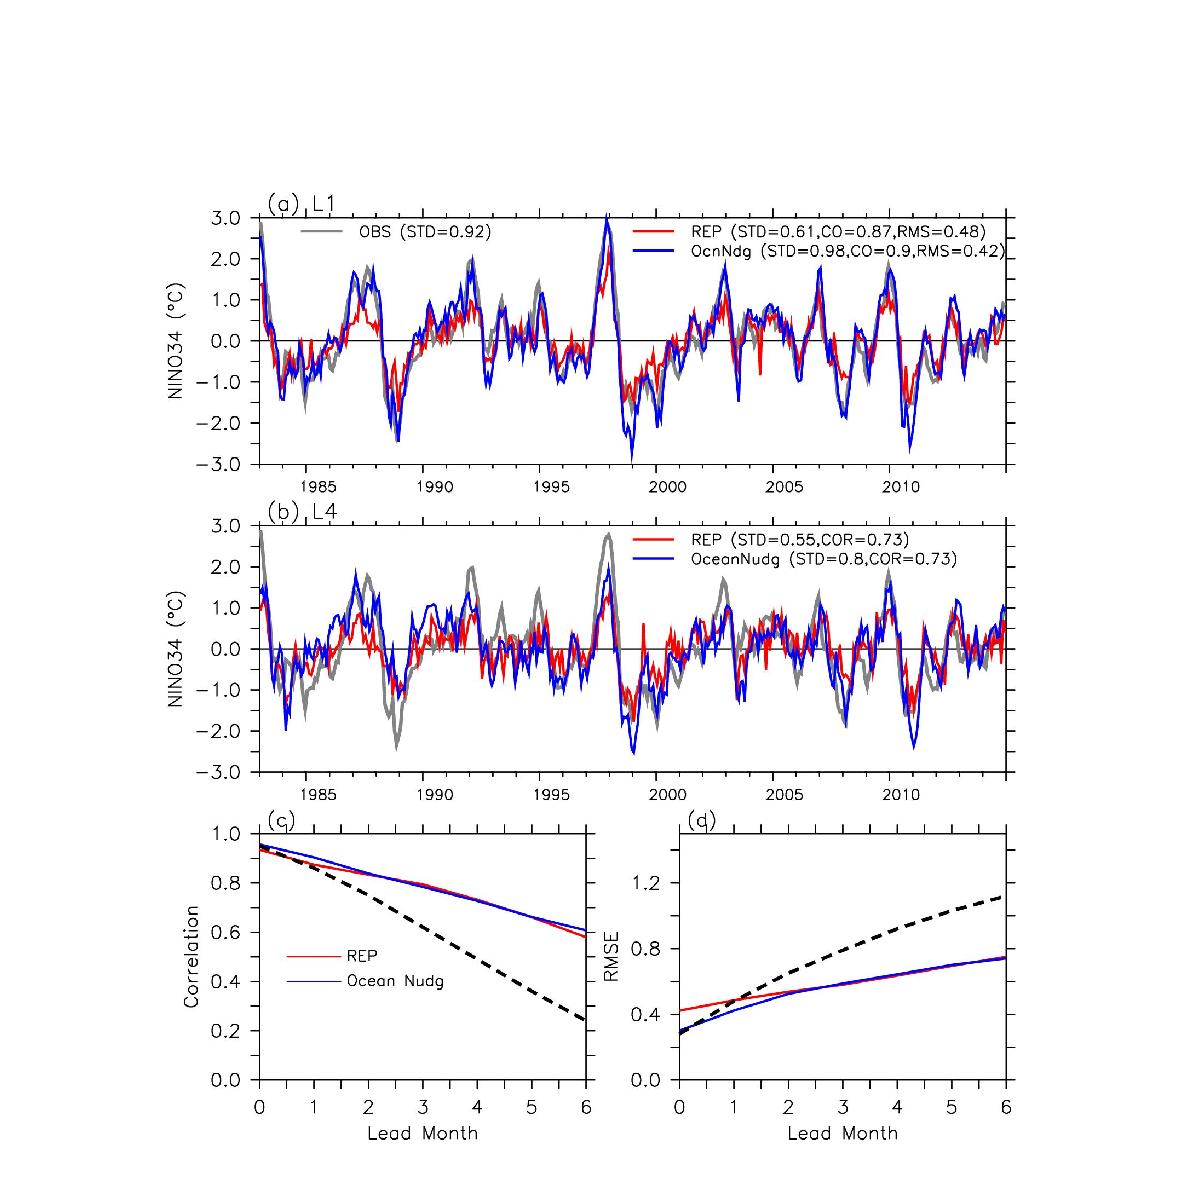 Time series of the Niño 3.4 index (°C) from observations (gray line) and